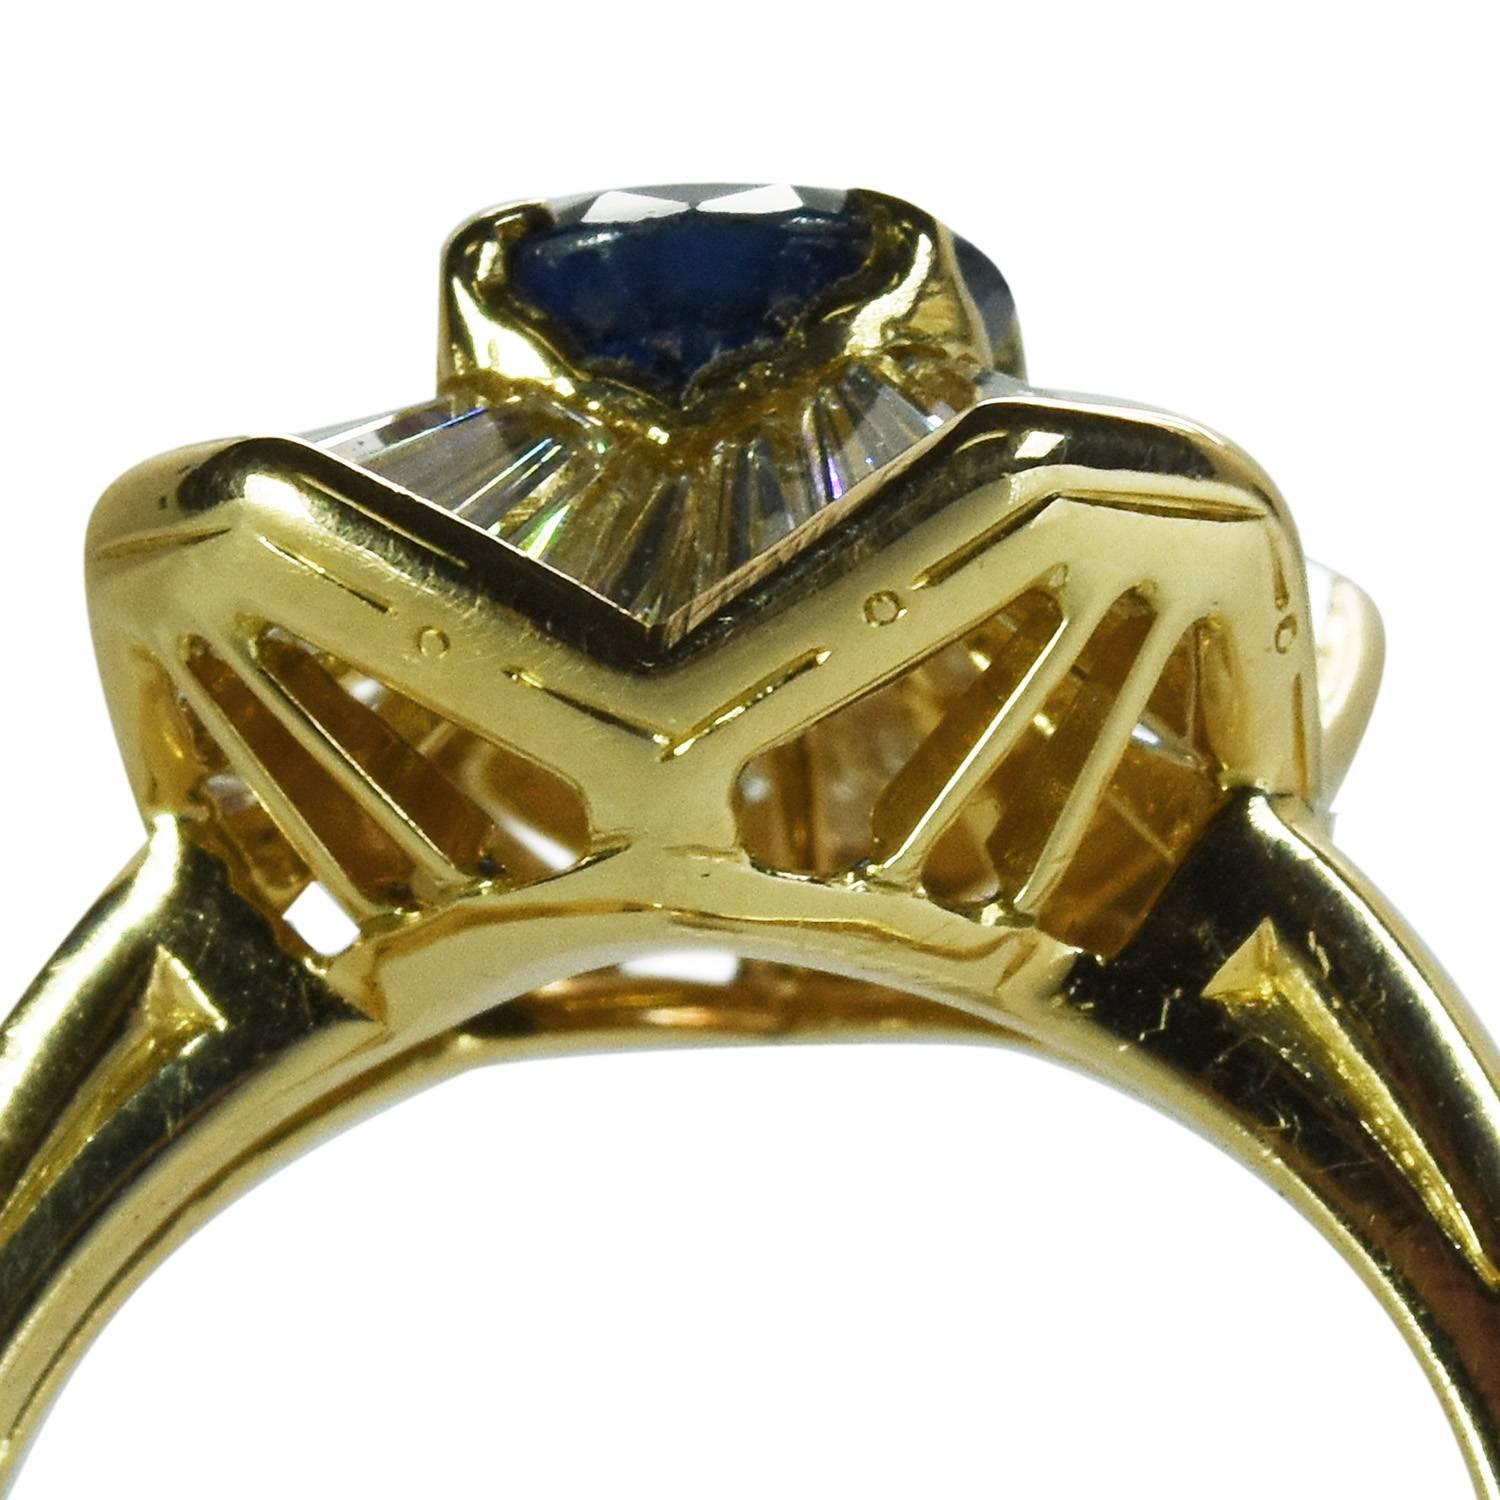 A Sapphire and Diamond Ring by iconic design house Oscar Heyman & Brothers. The ring features an oval sapphire weighing approximately 1.13 carats surrounded by tapered baguette diamonds totaling approximately 1.85 carats. The ring stamped 18k and